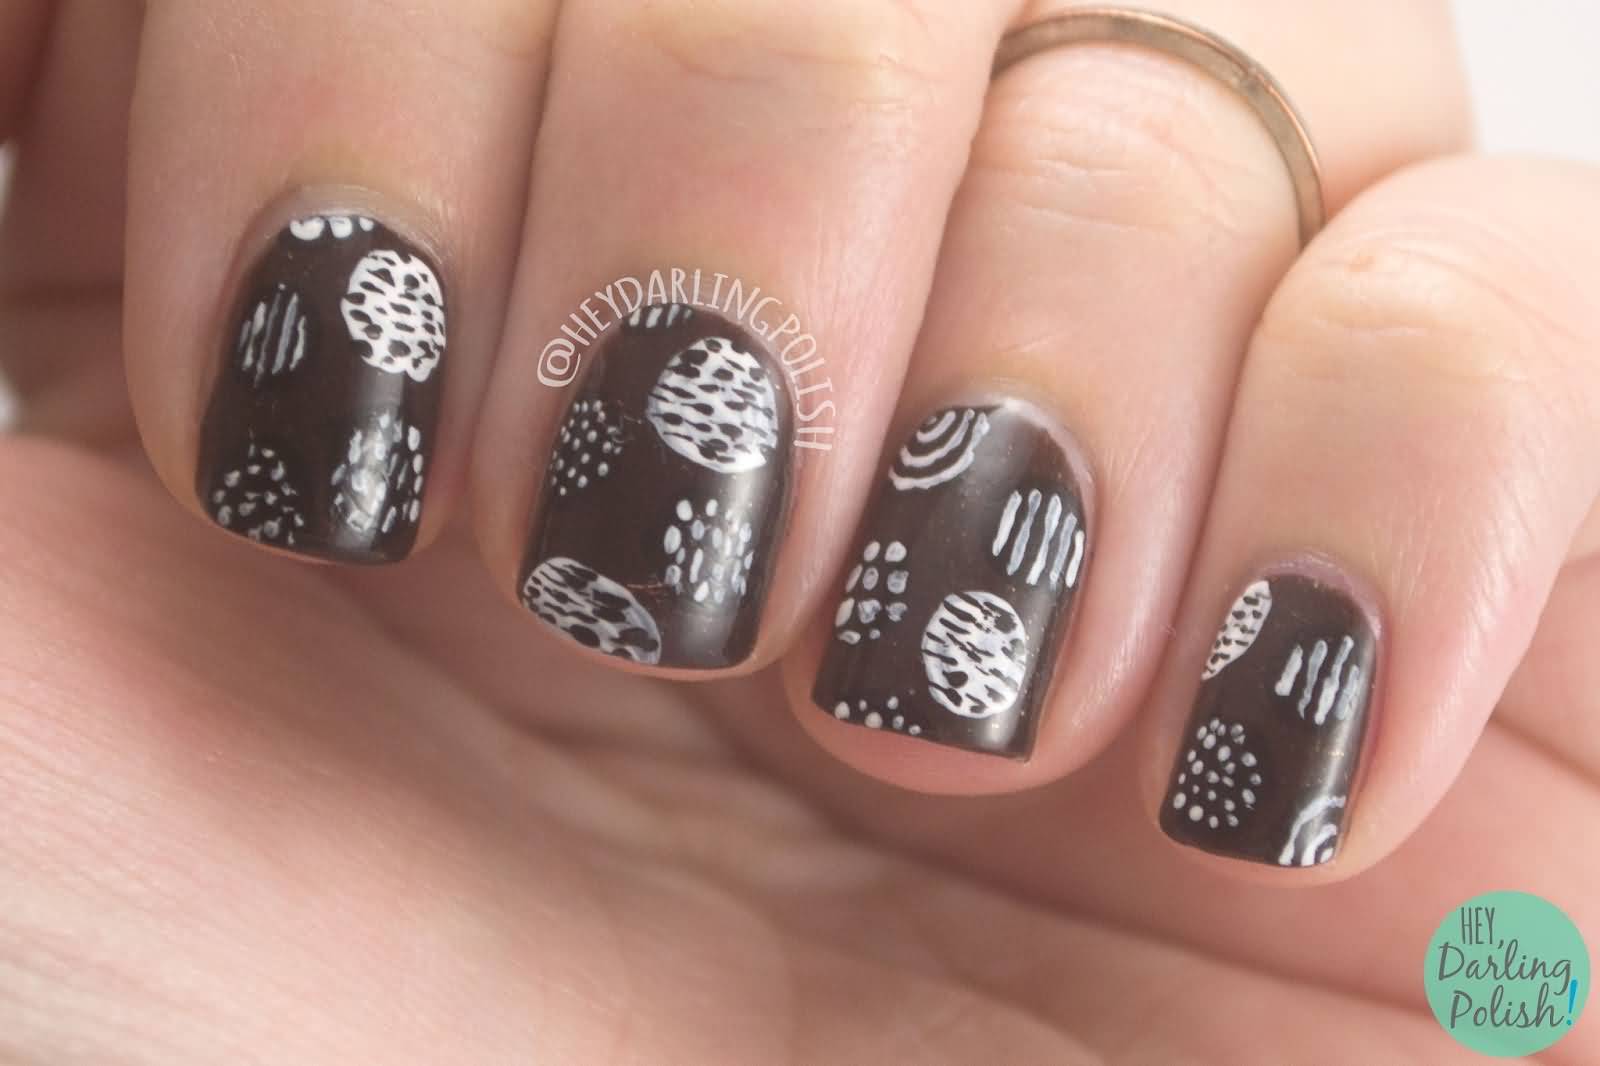 Brown Nails With White Design Nail Art Idea